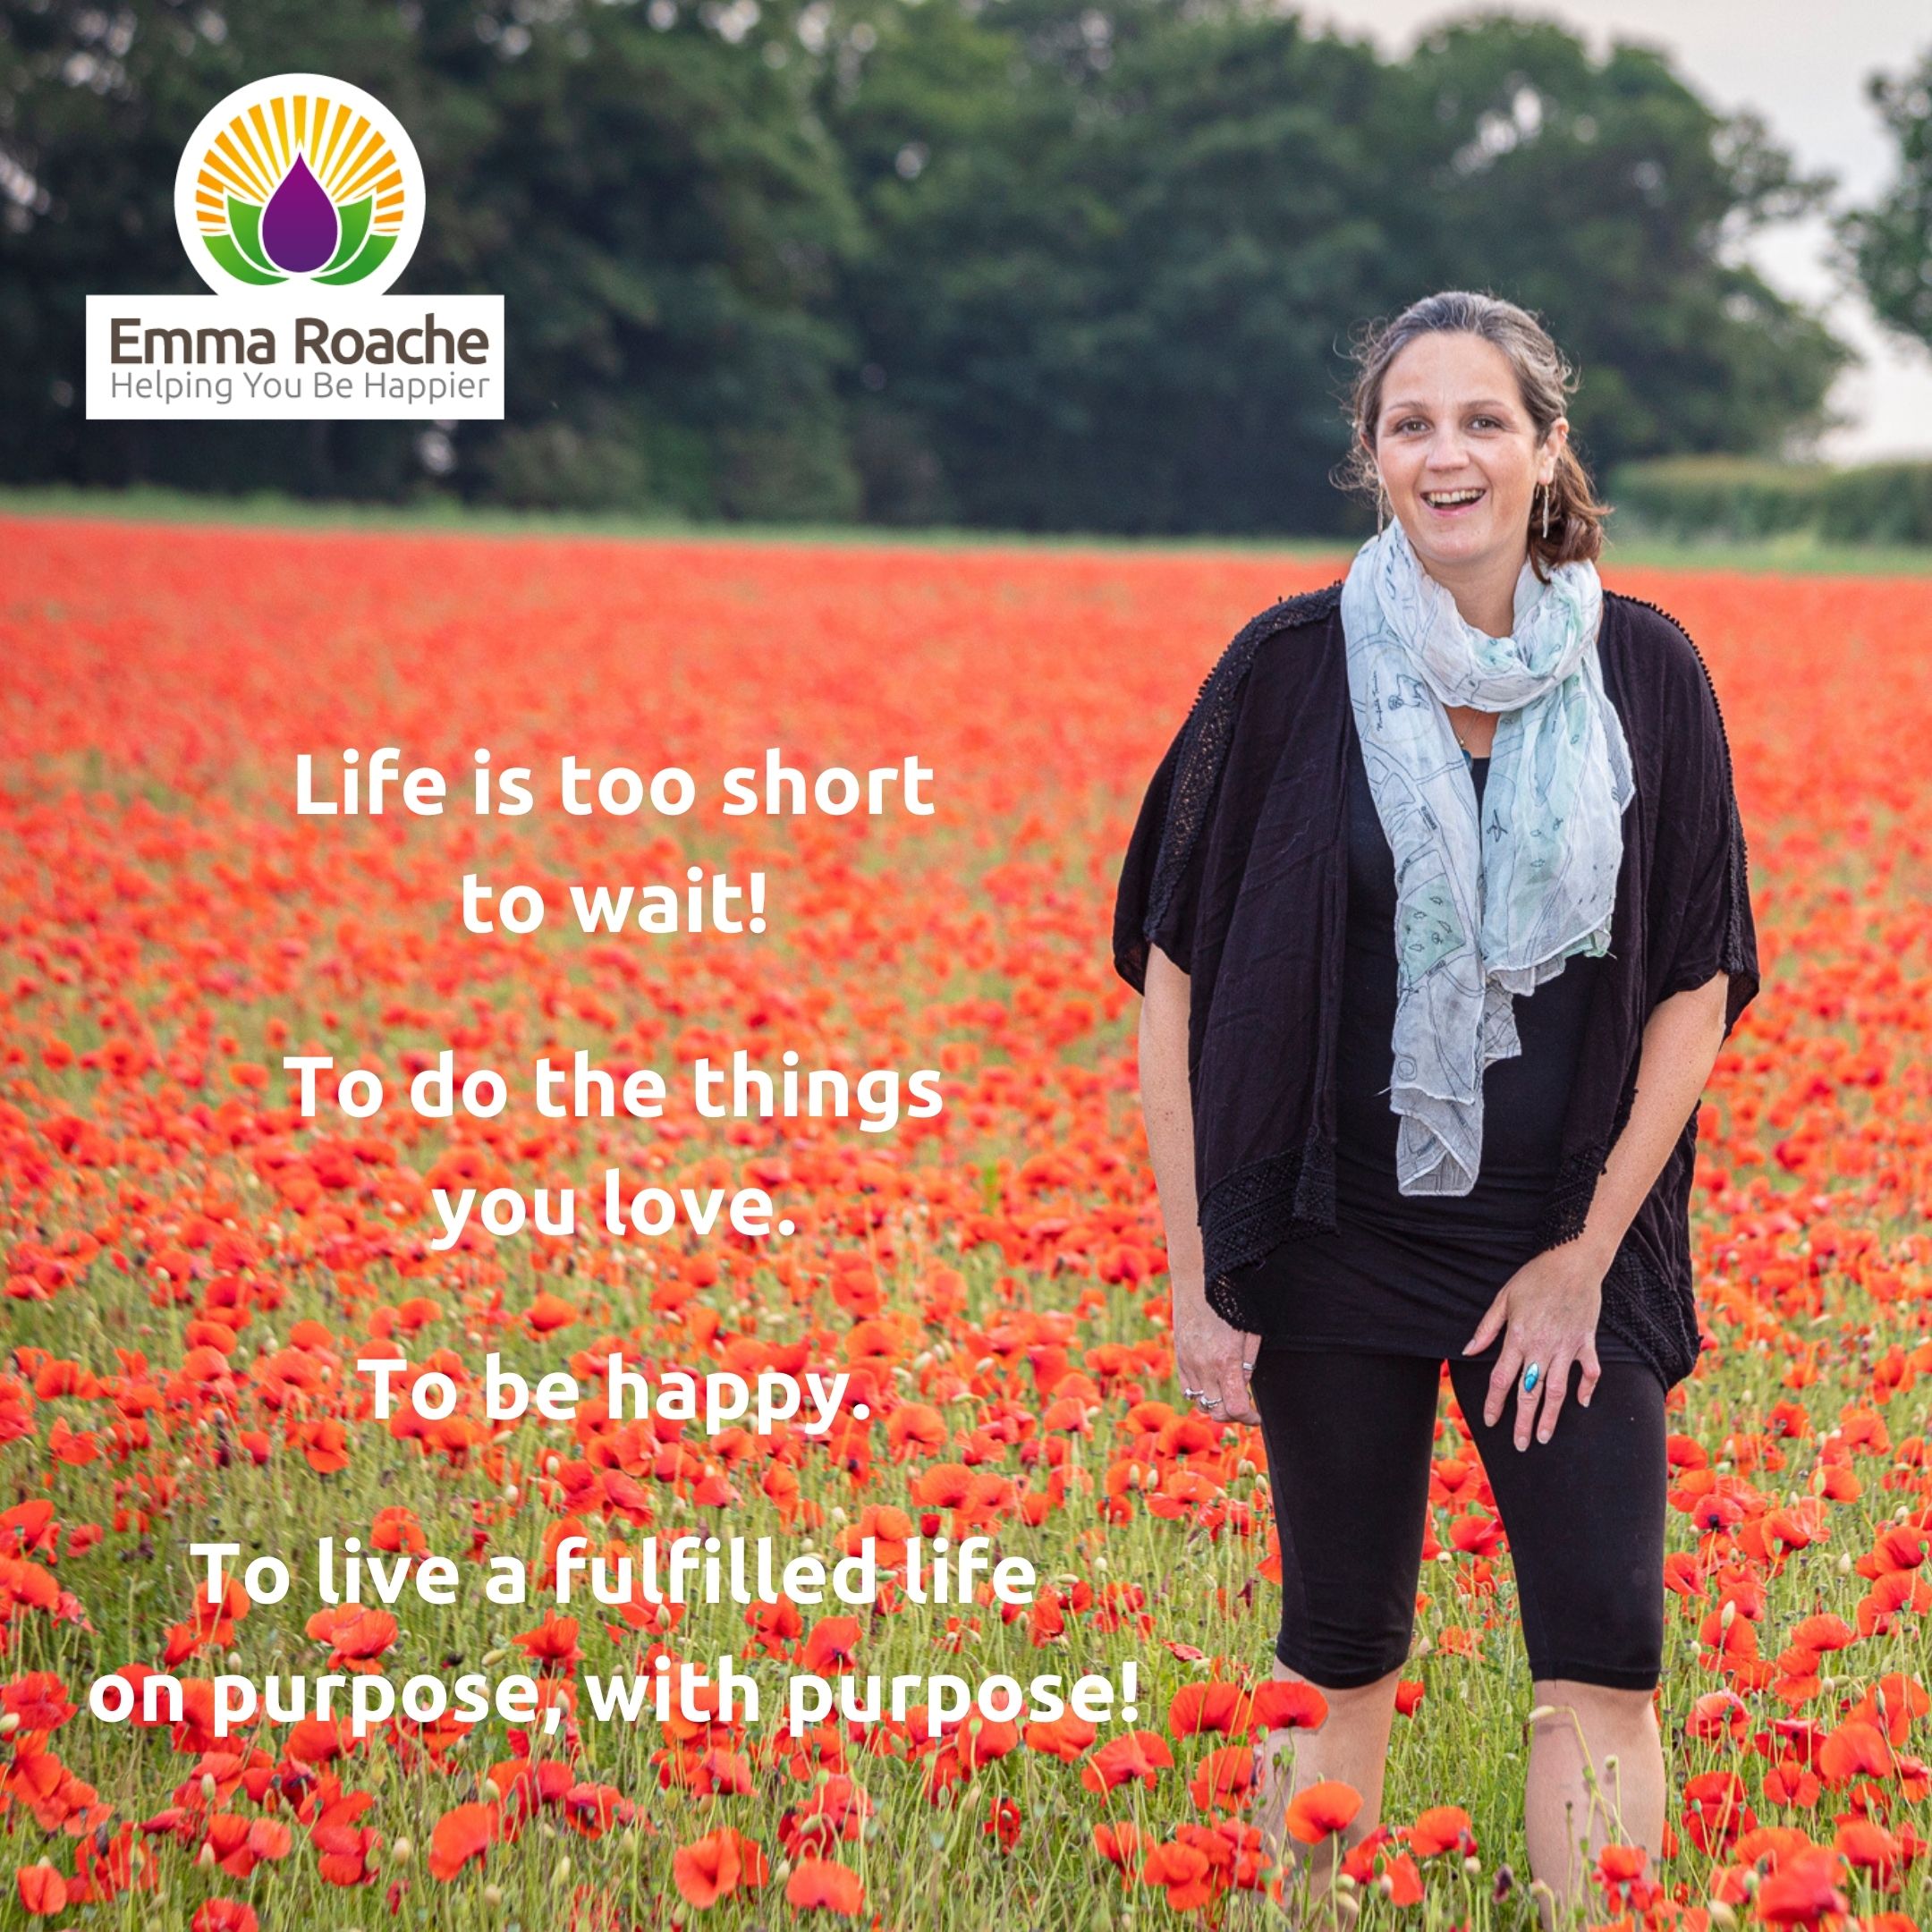 Life is too short to wait!